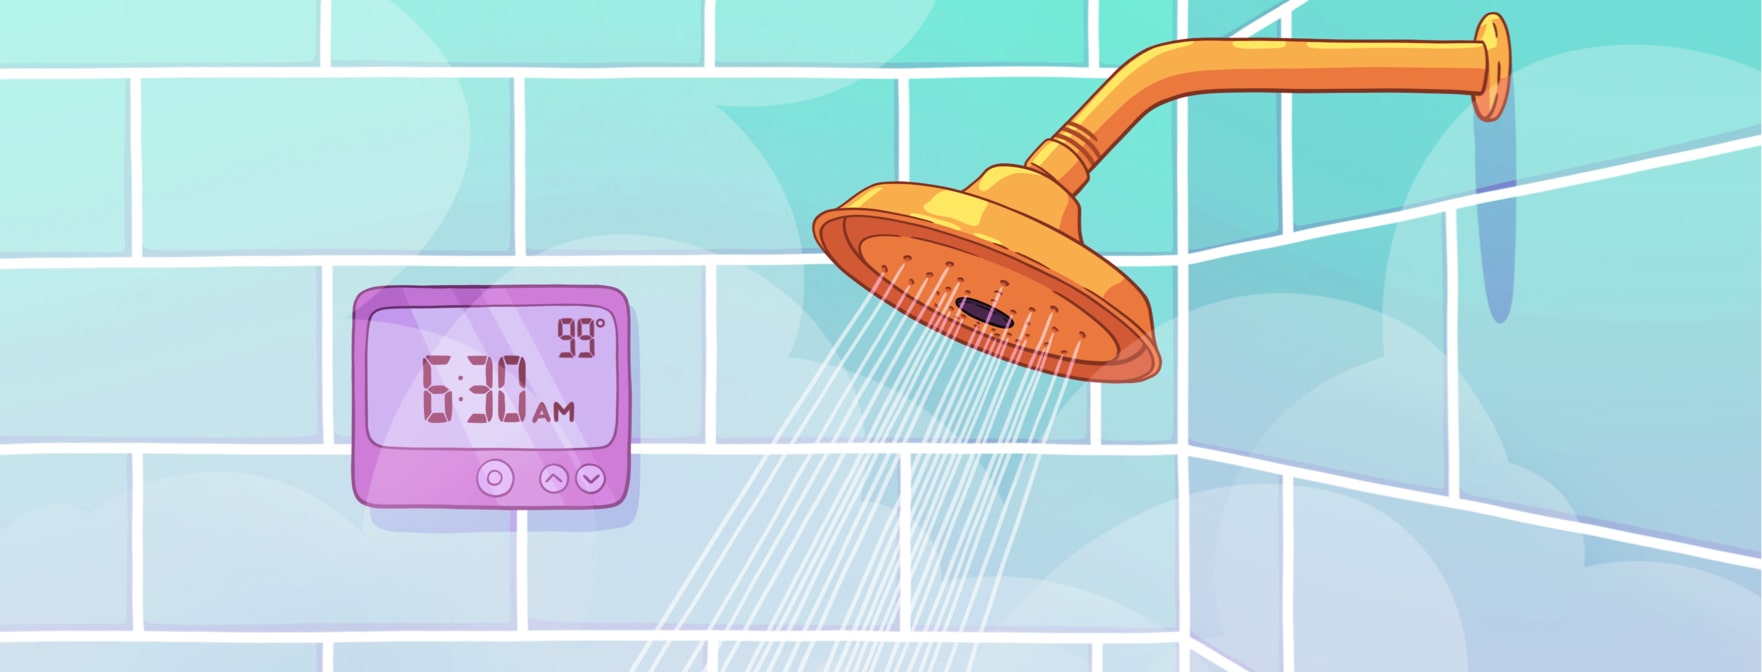 A shower head and clock in a steamy tiled shower